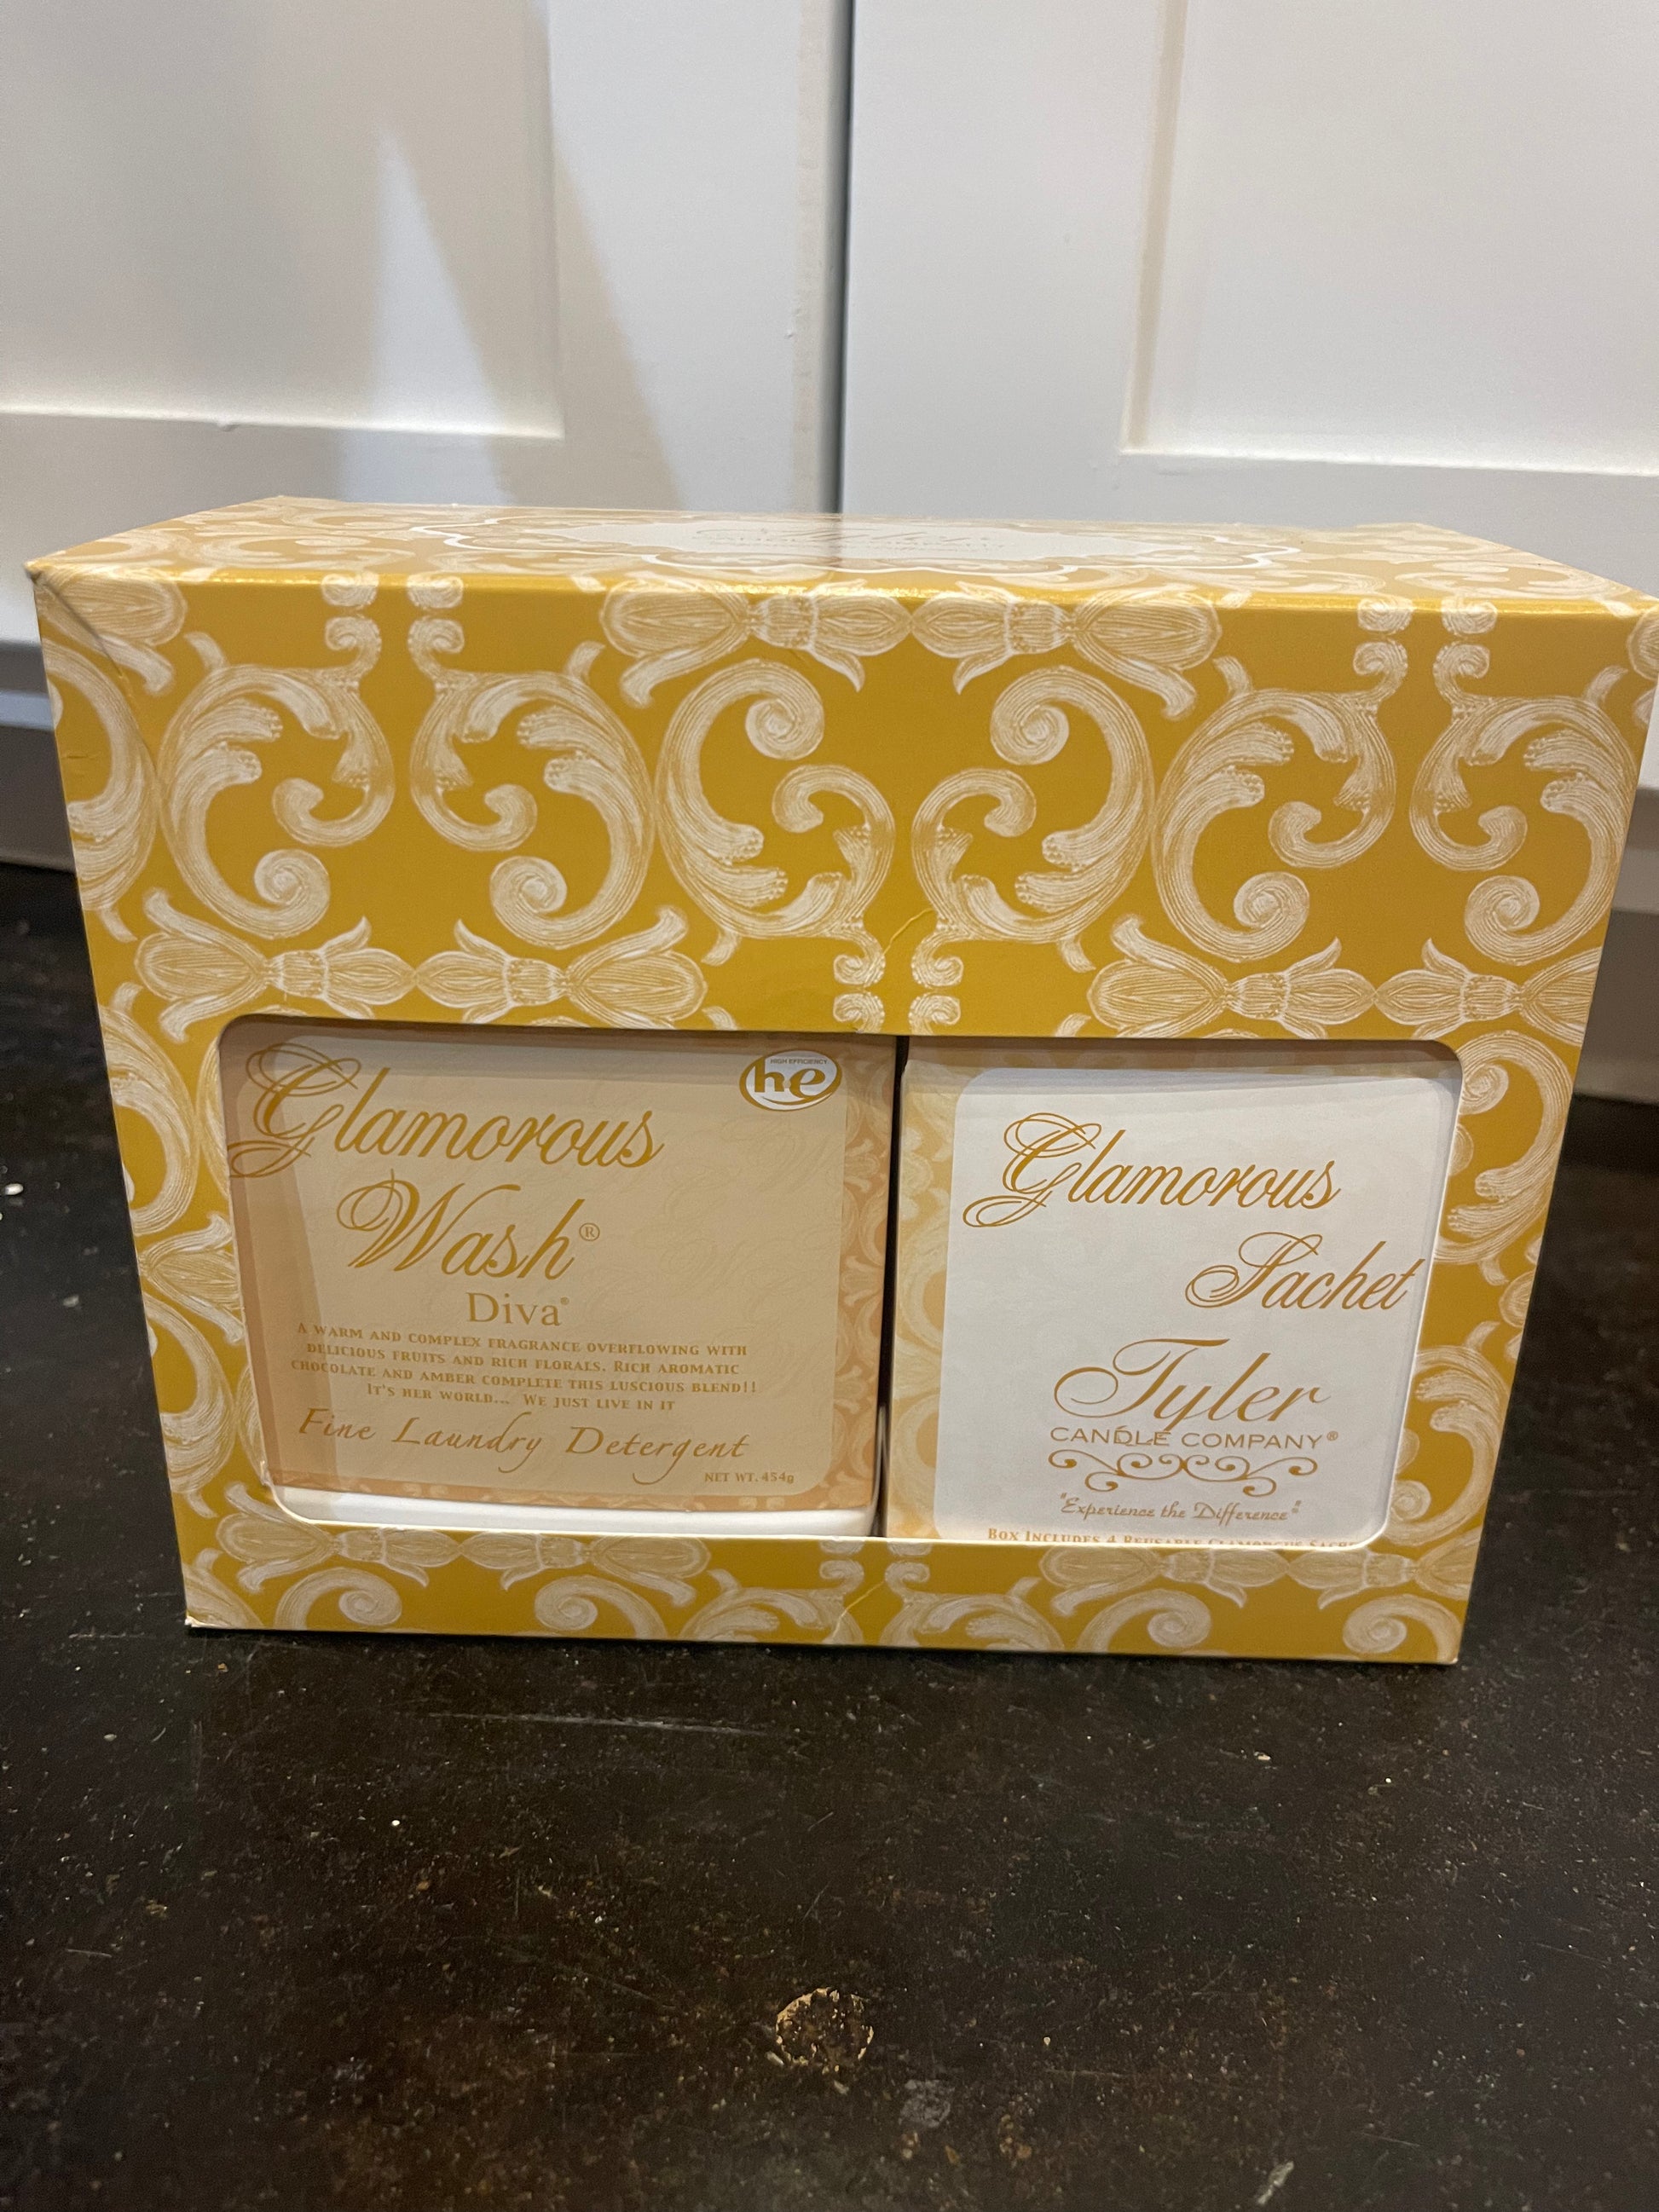 "Diva" Tyler Candle Company Glamorous Gift Suite V.